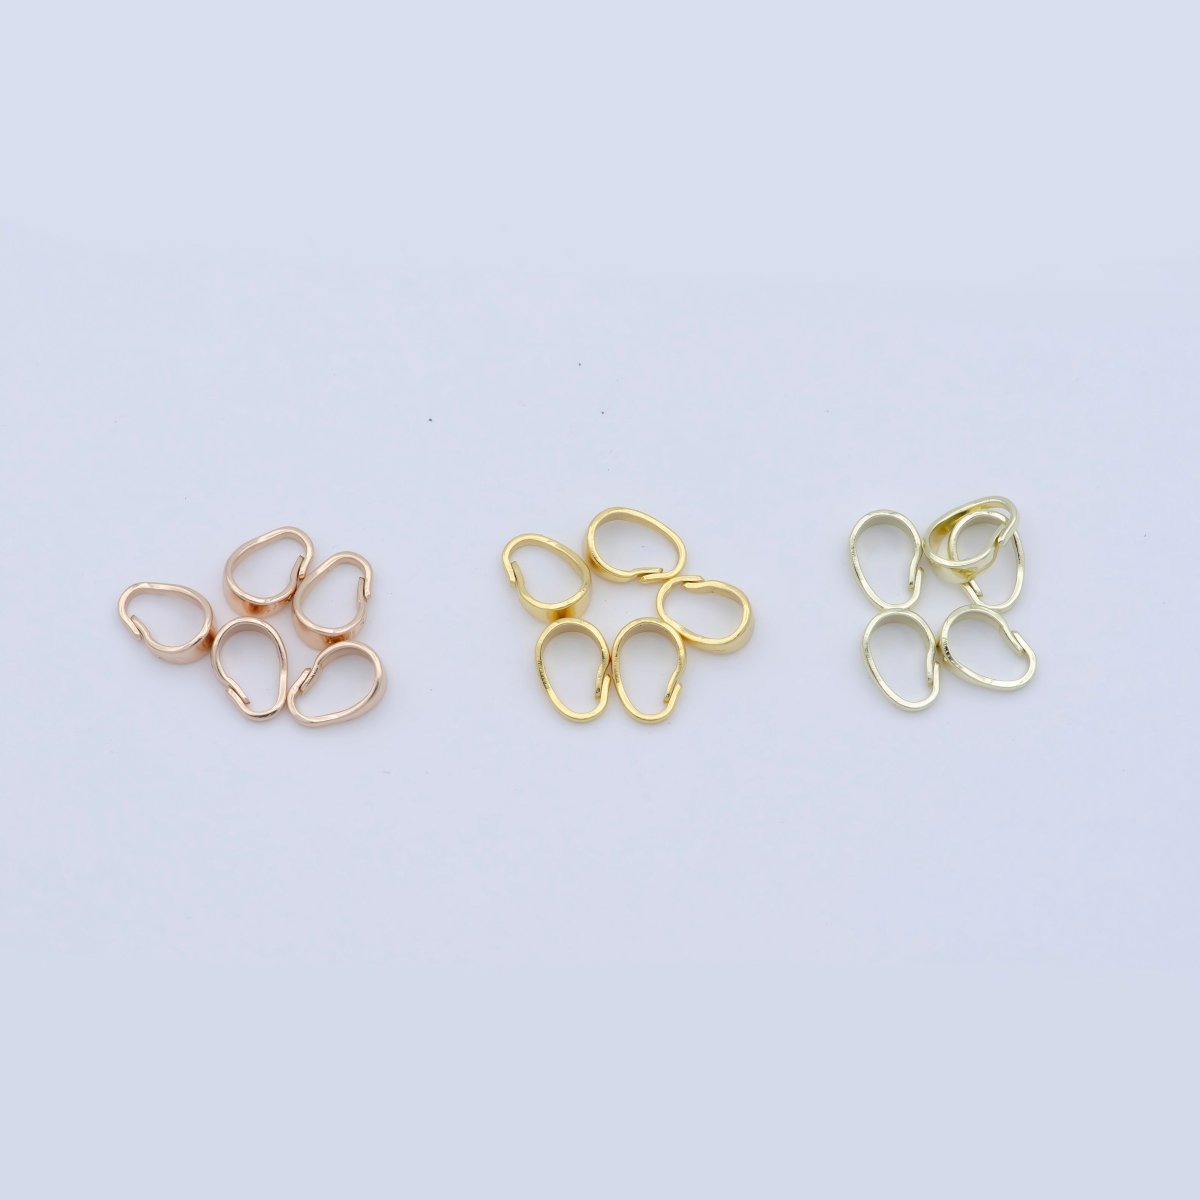 Open Jump Rings Pendant Hooks Gold Filled Jewelry Finding Kit Supplies For DIY Necklace Jewelry Making L-398~L-400 - DLUXCA